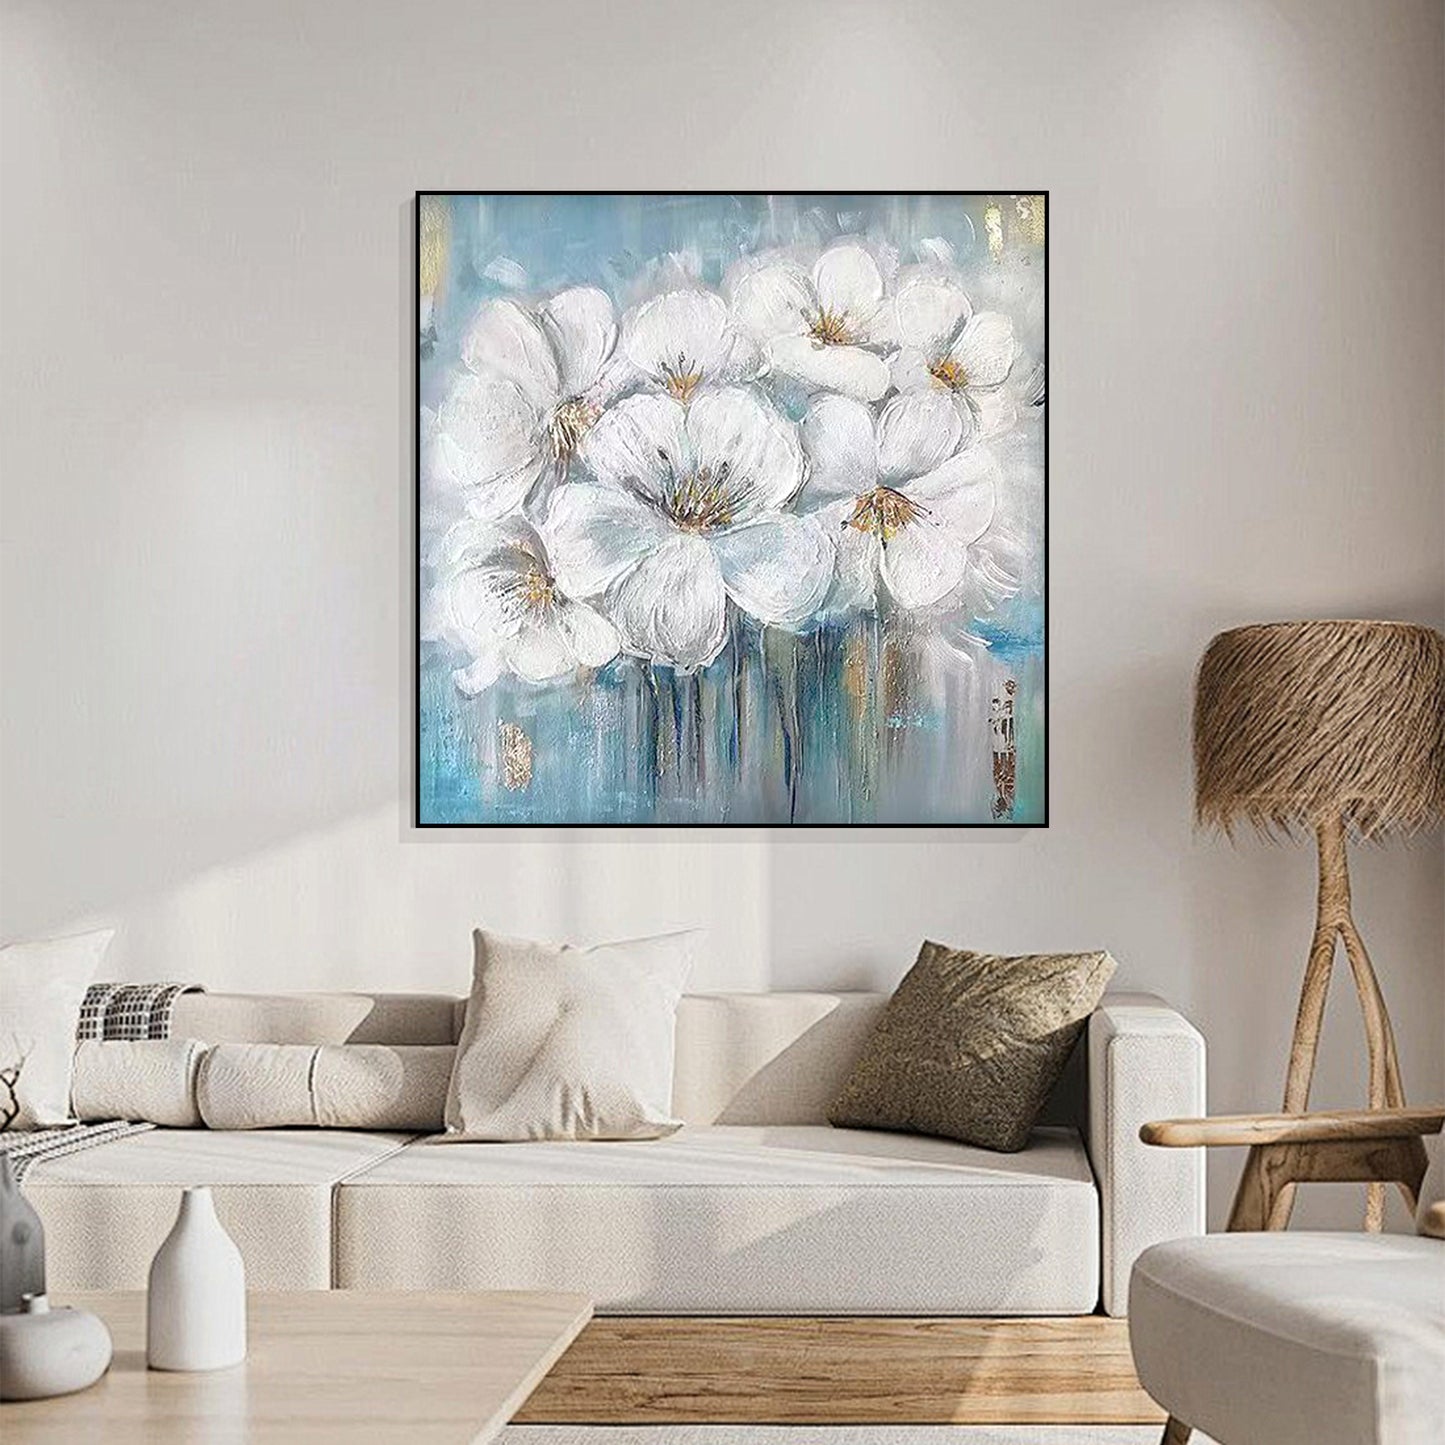 FLOWER PAINTING, WHITE FLOWER, HAND-PAINTED CANVAS